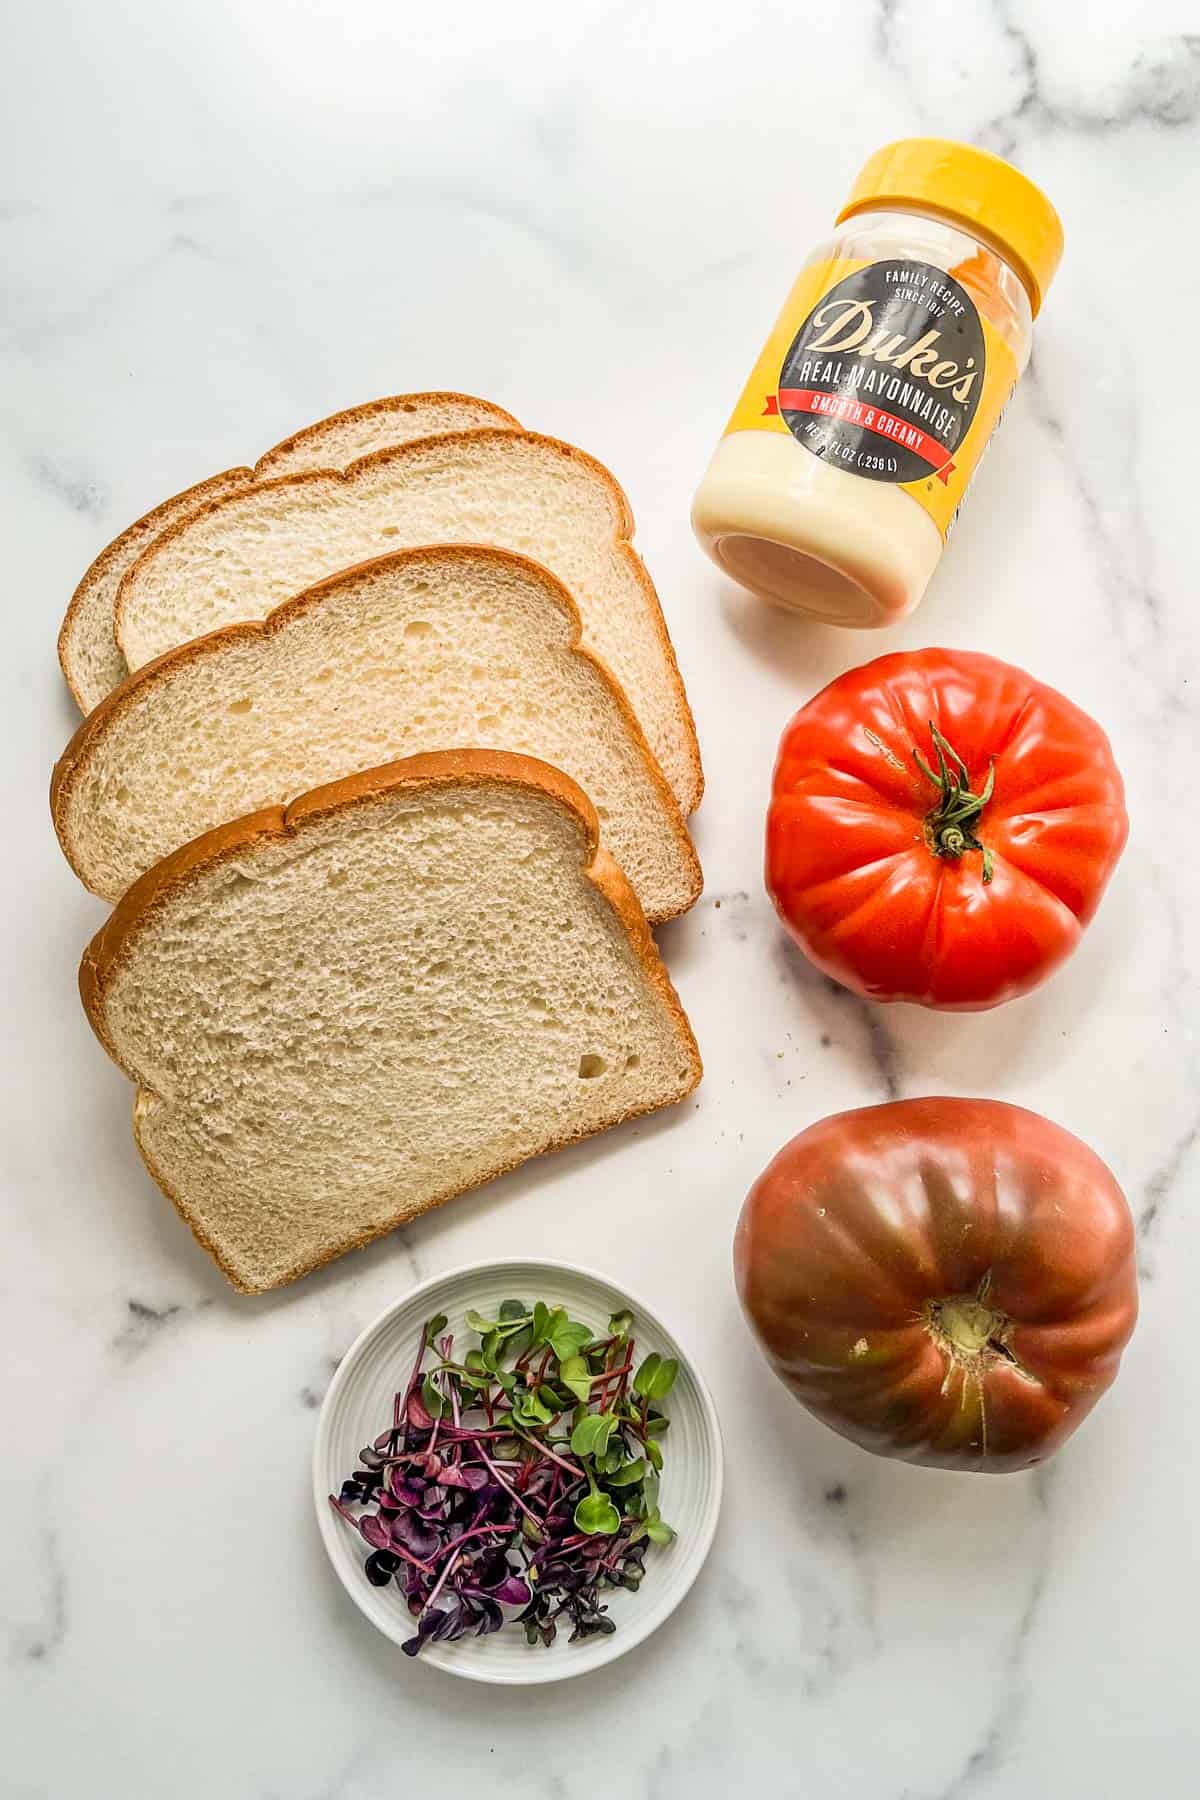 Ingredients for tomato sandwiches.